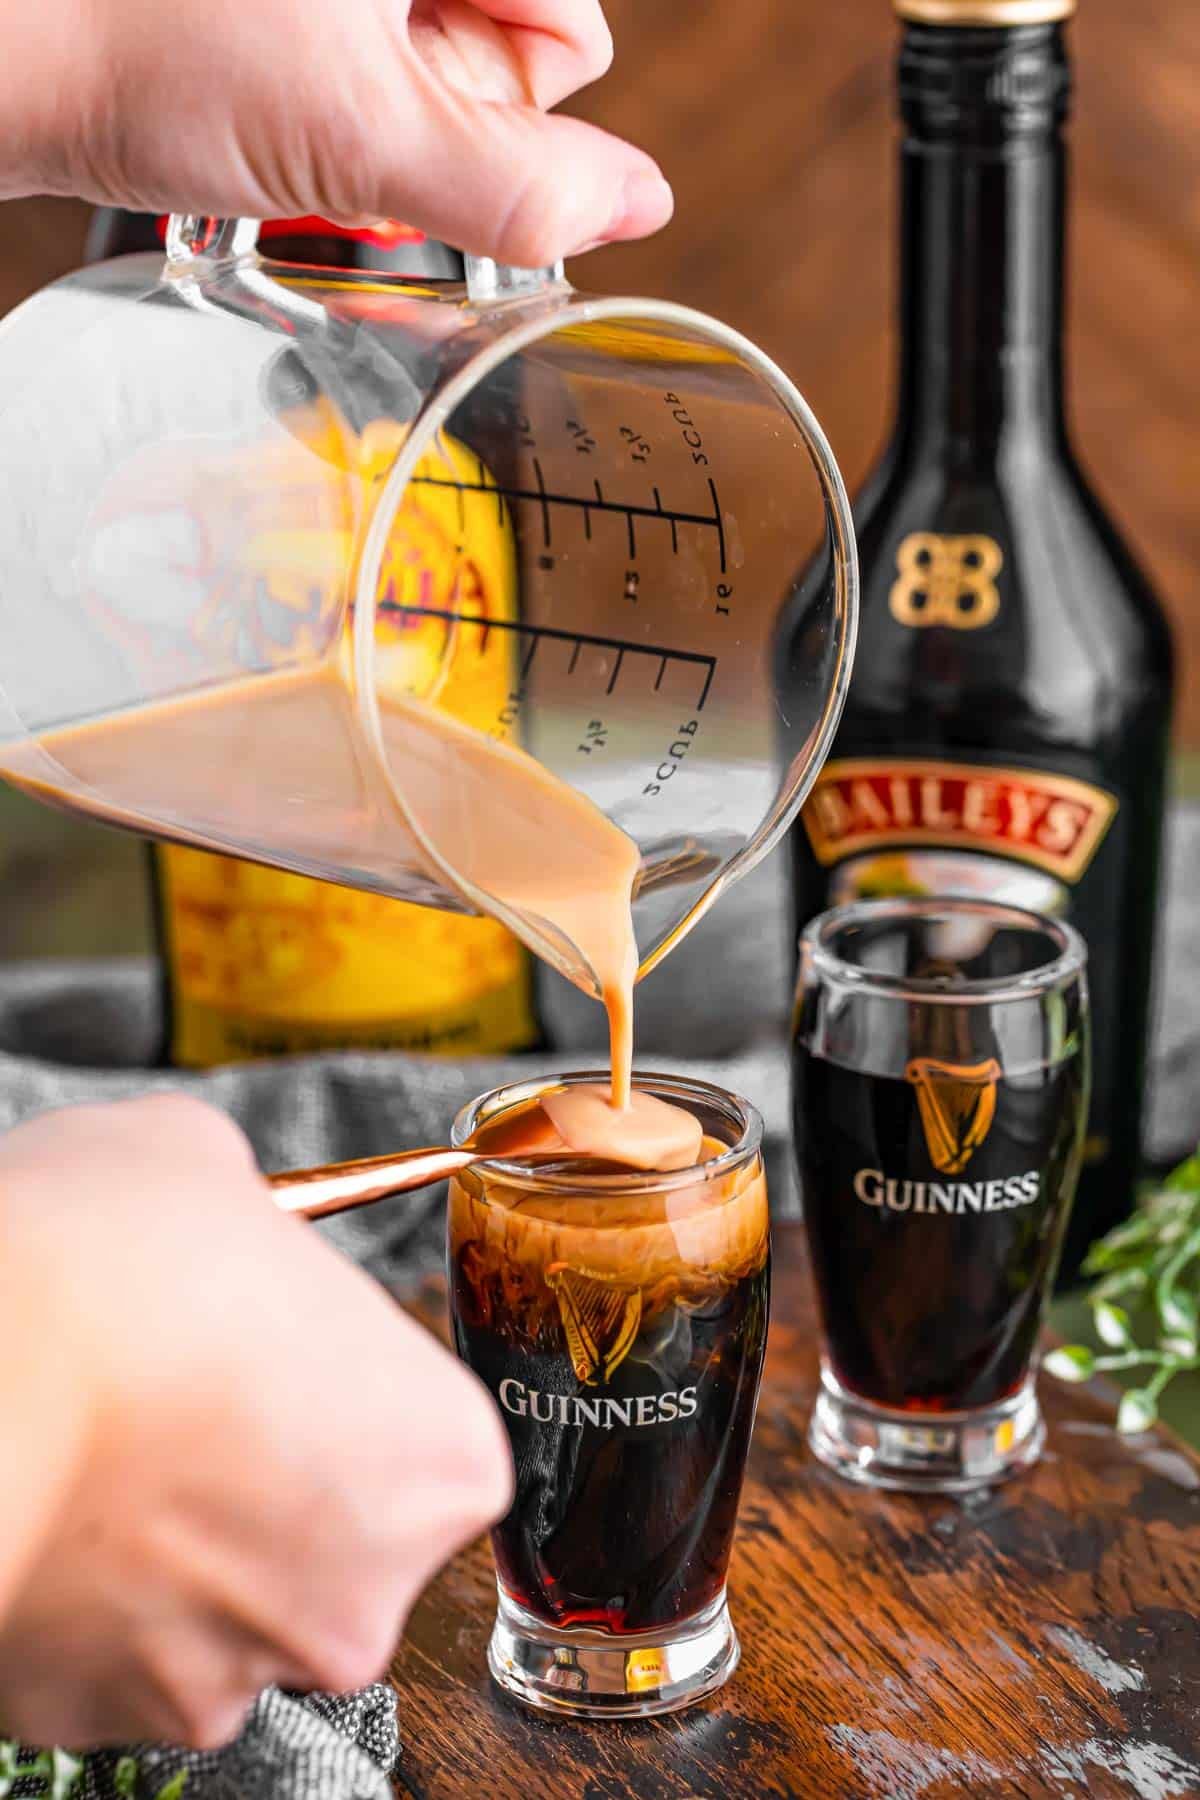 Bailey's Irish cream being poured over the back of a spoon into a shot glass with Kahlua to make a baby Guinness.